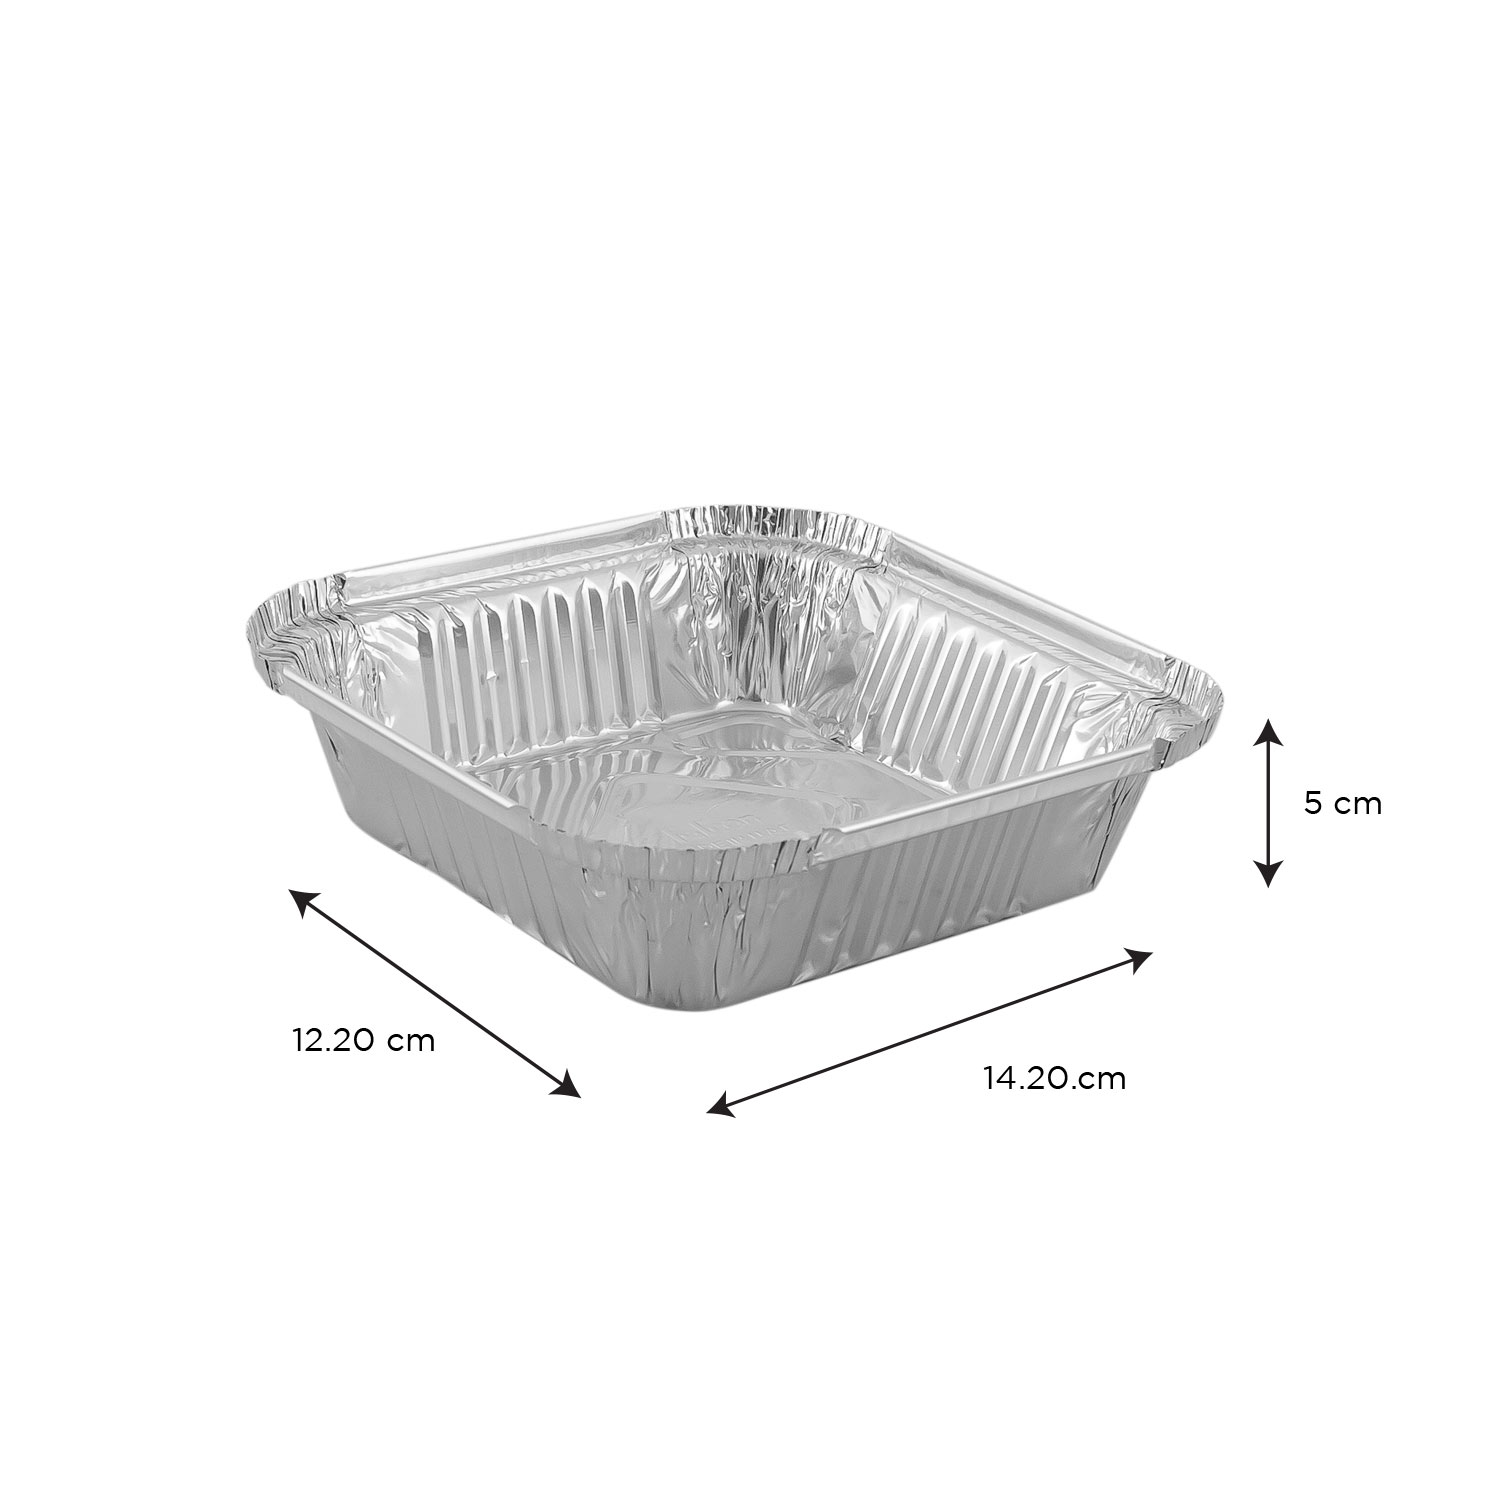 1 lb. Oblong Take-Out Foil Container